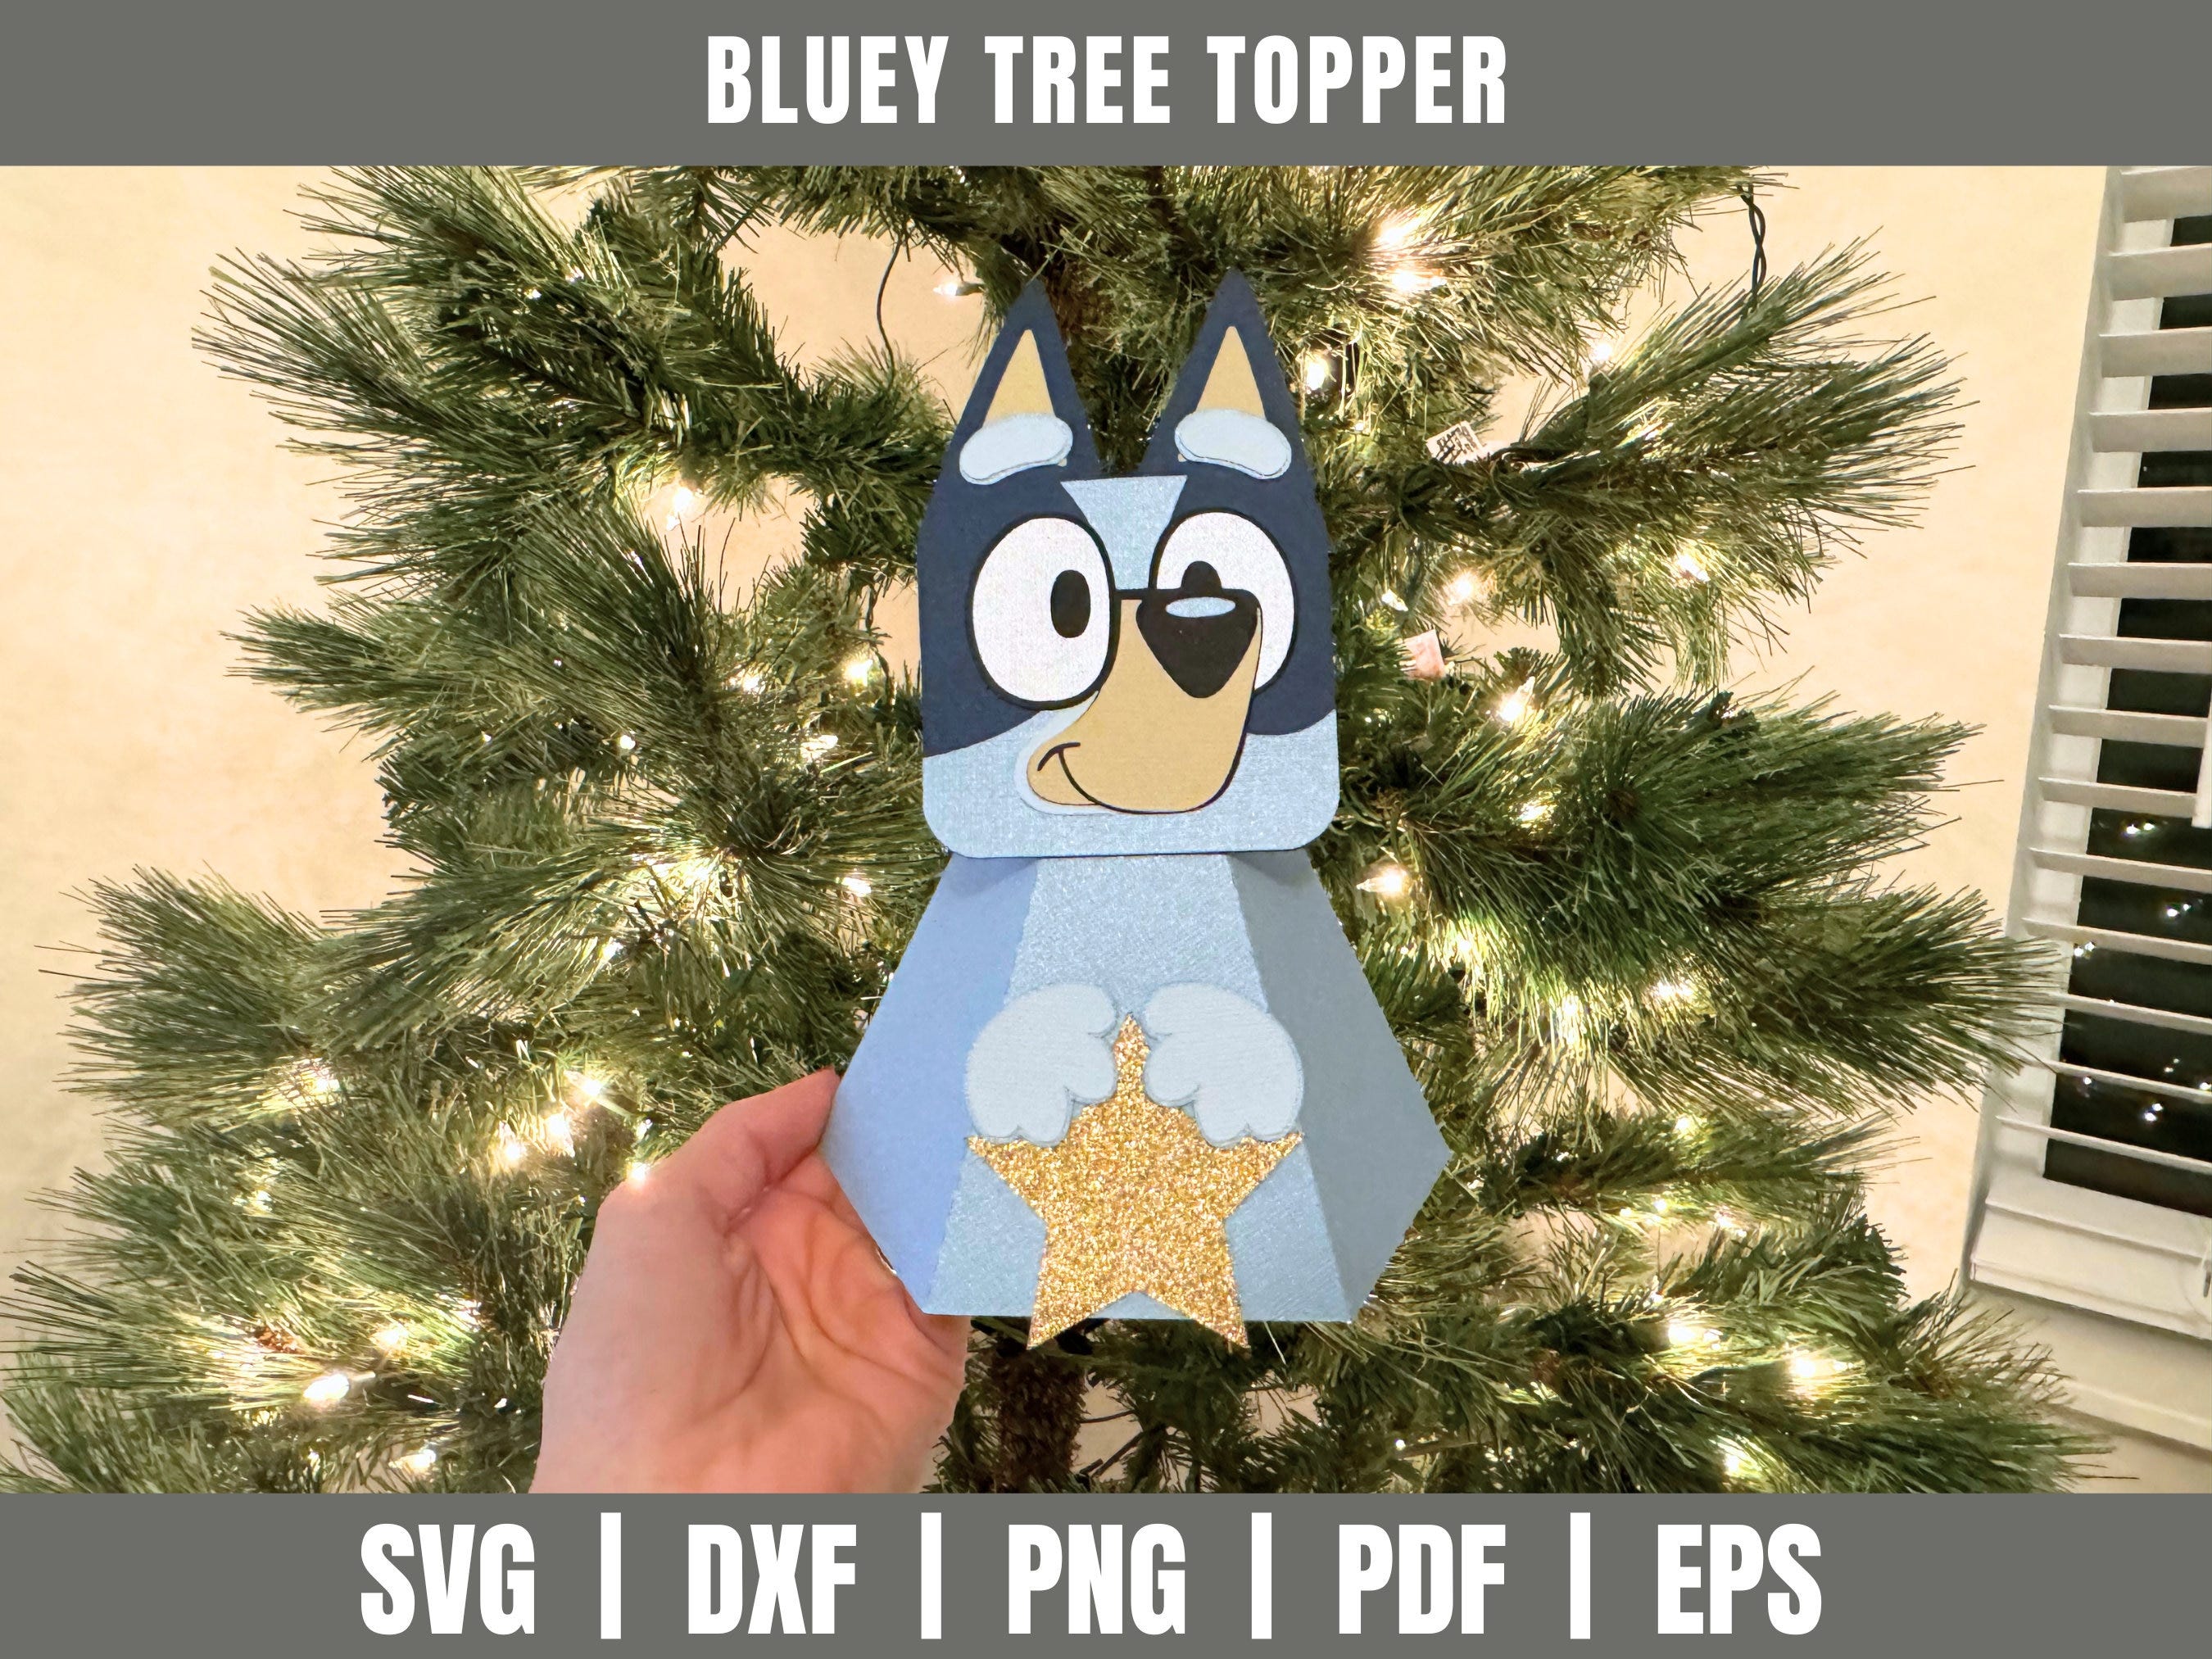 Blue Dog Tree Topper SVG | Blue Dog Inspired Tree Topper Cut File | Blue Party DIY | Template Cake Topper Cut File | Blue Party Template